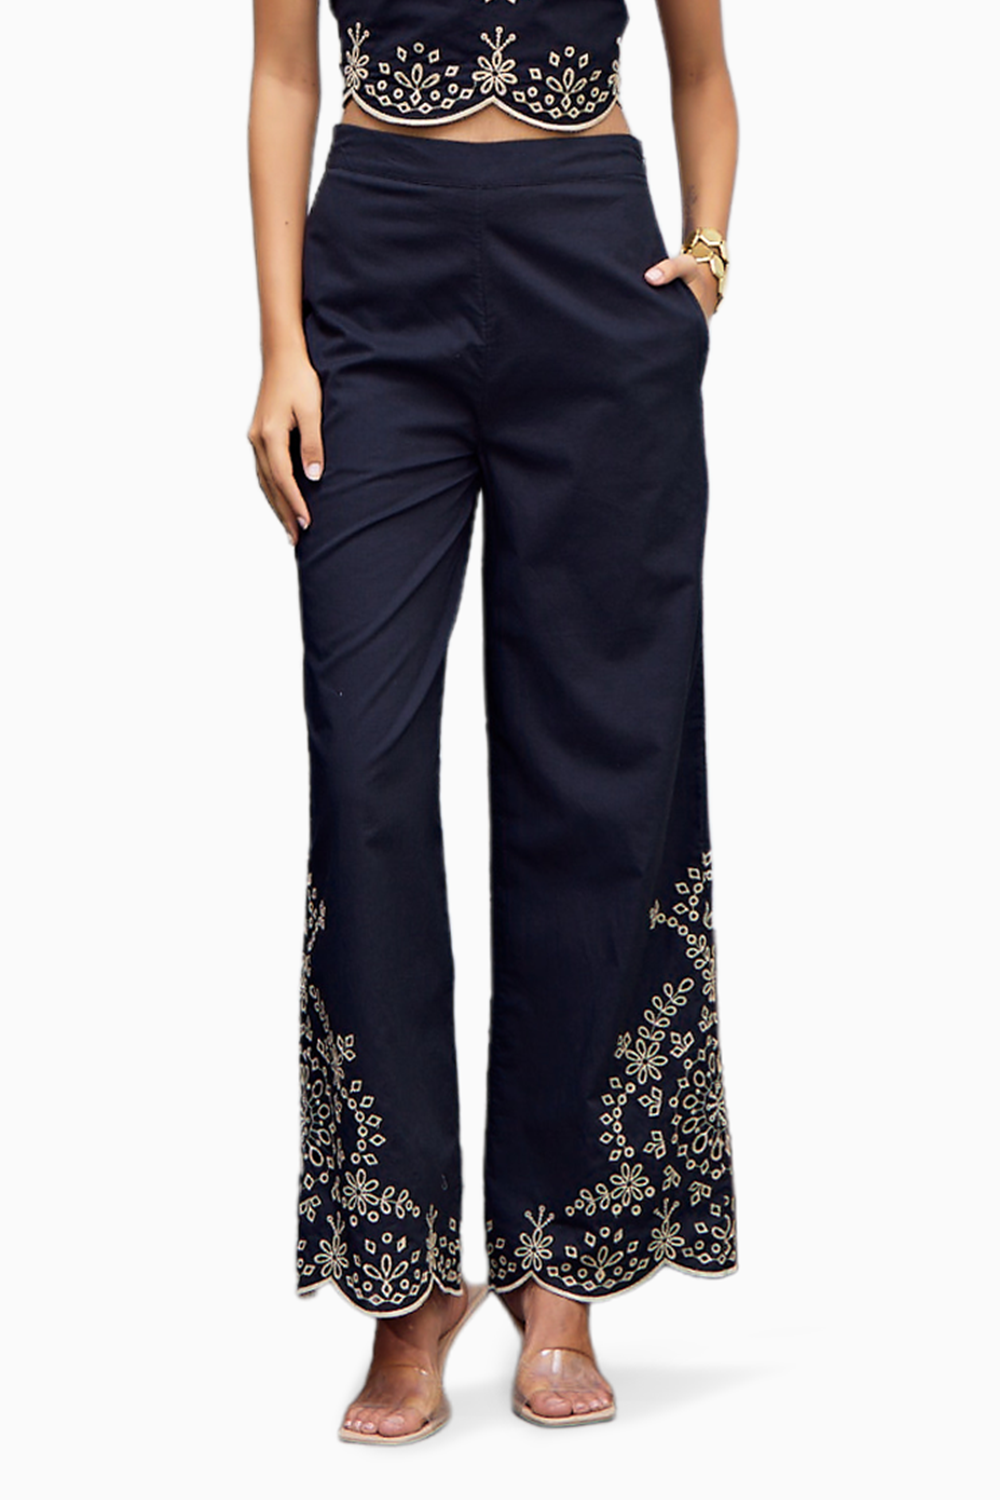 Romneya Black Embroidered Trousers